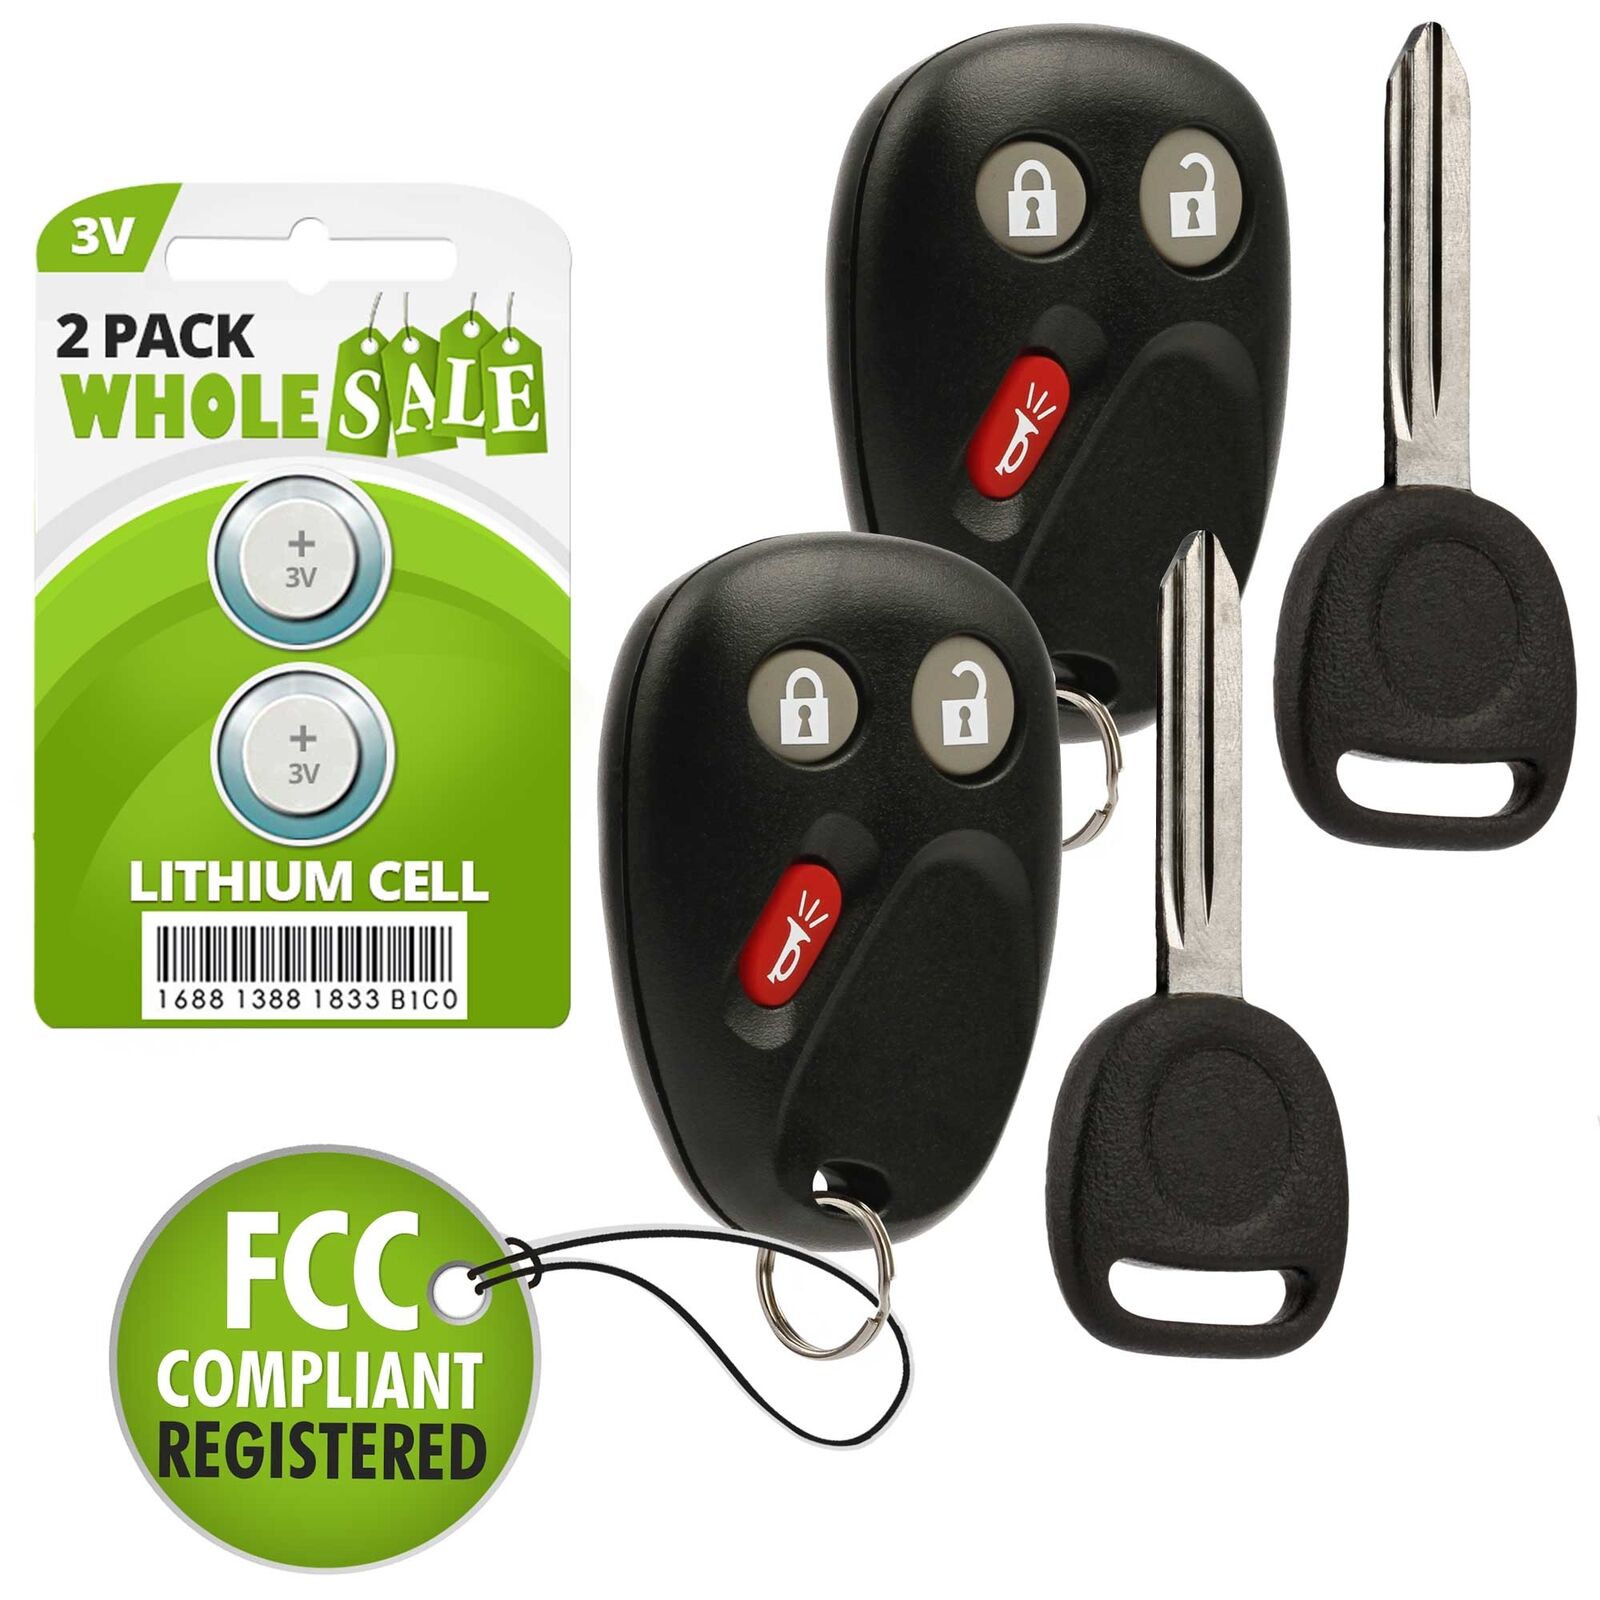 2 Replacement For 2003 2004 2005 2006 Chevrolet Avalanche Key + Fob Remote